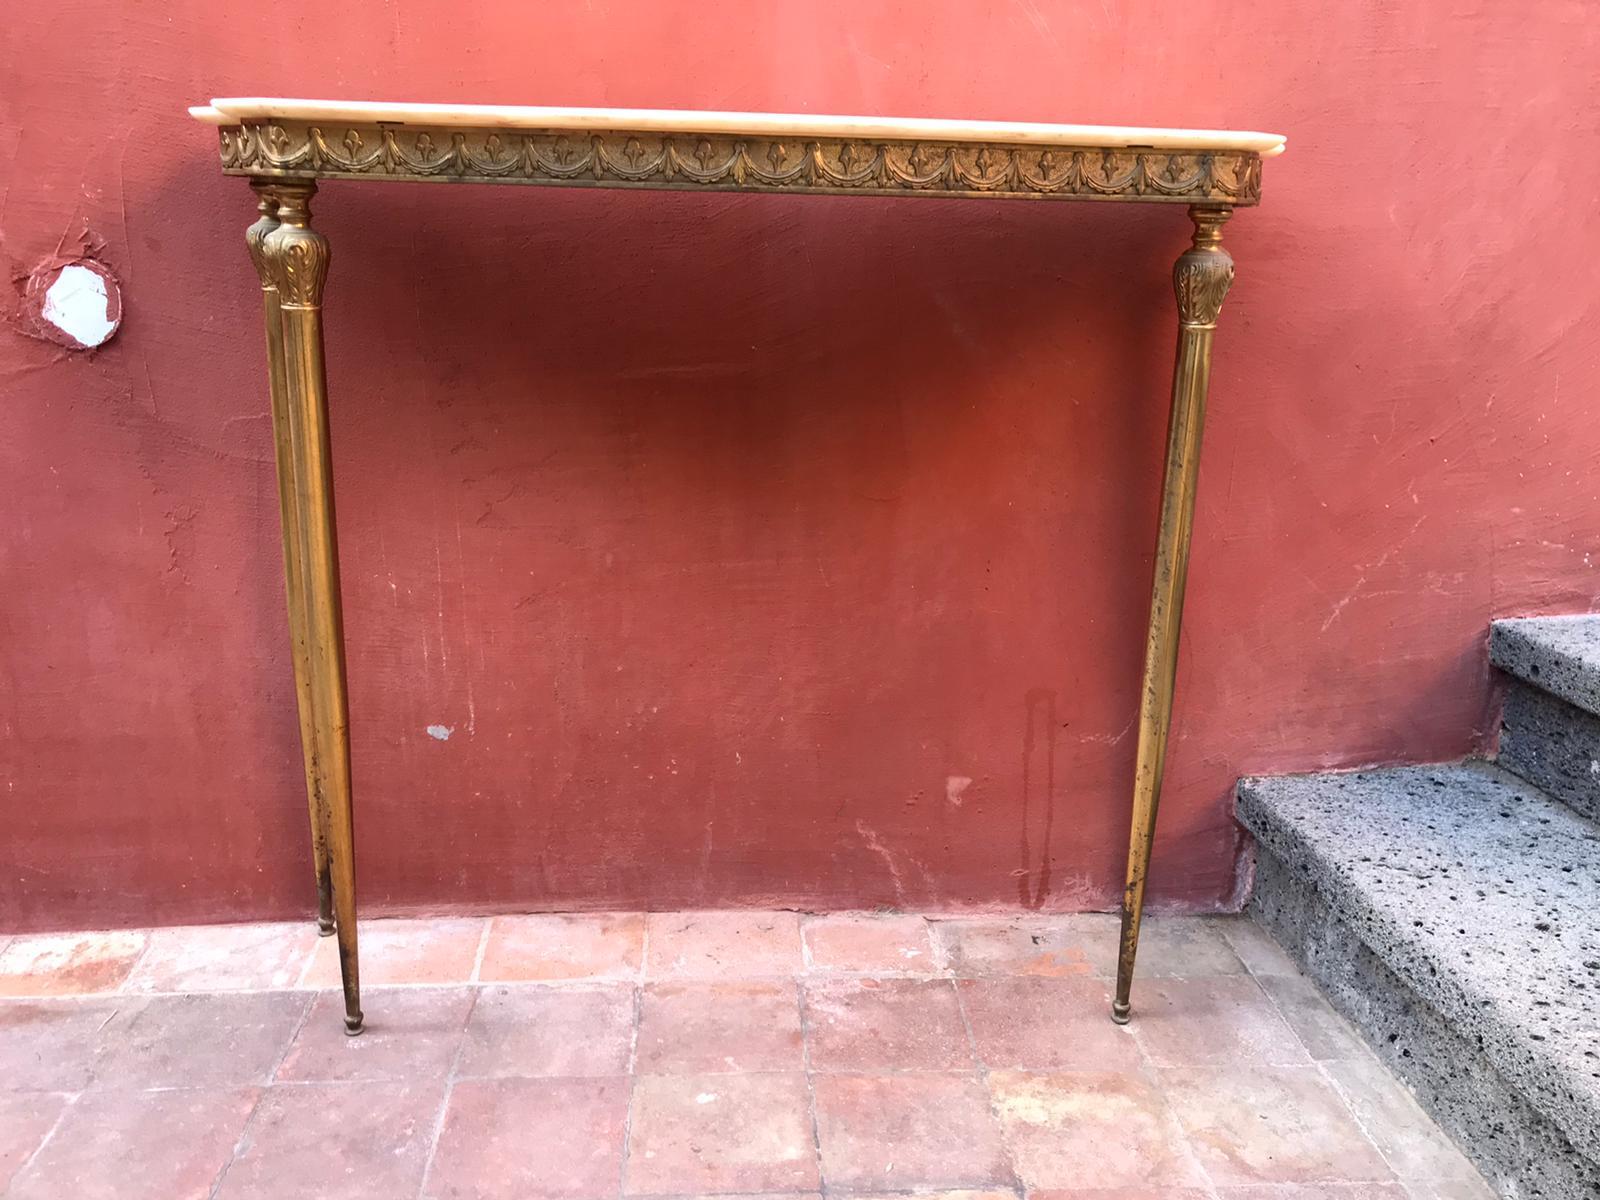 A brass console table with decorated motifs and white marble top.